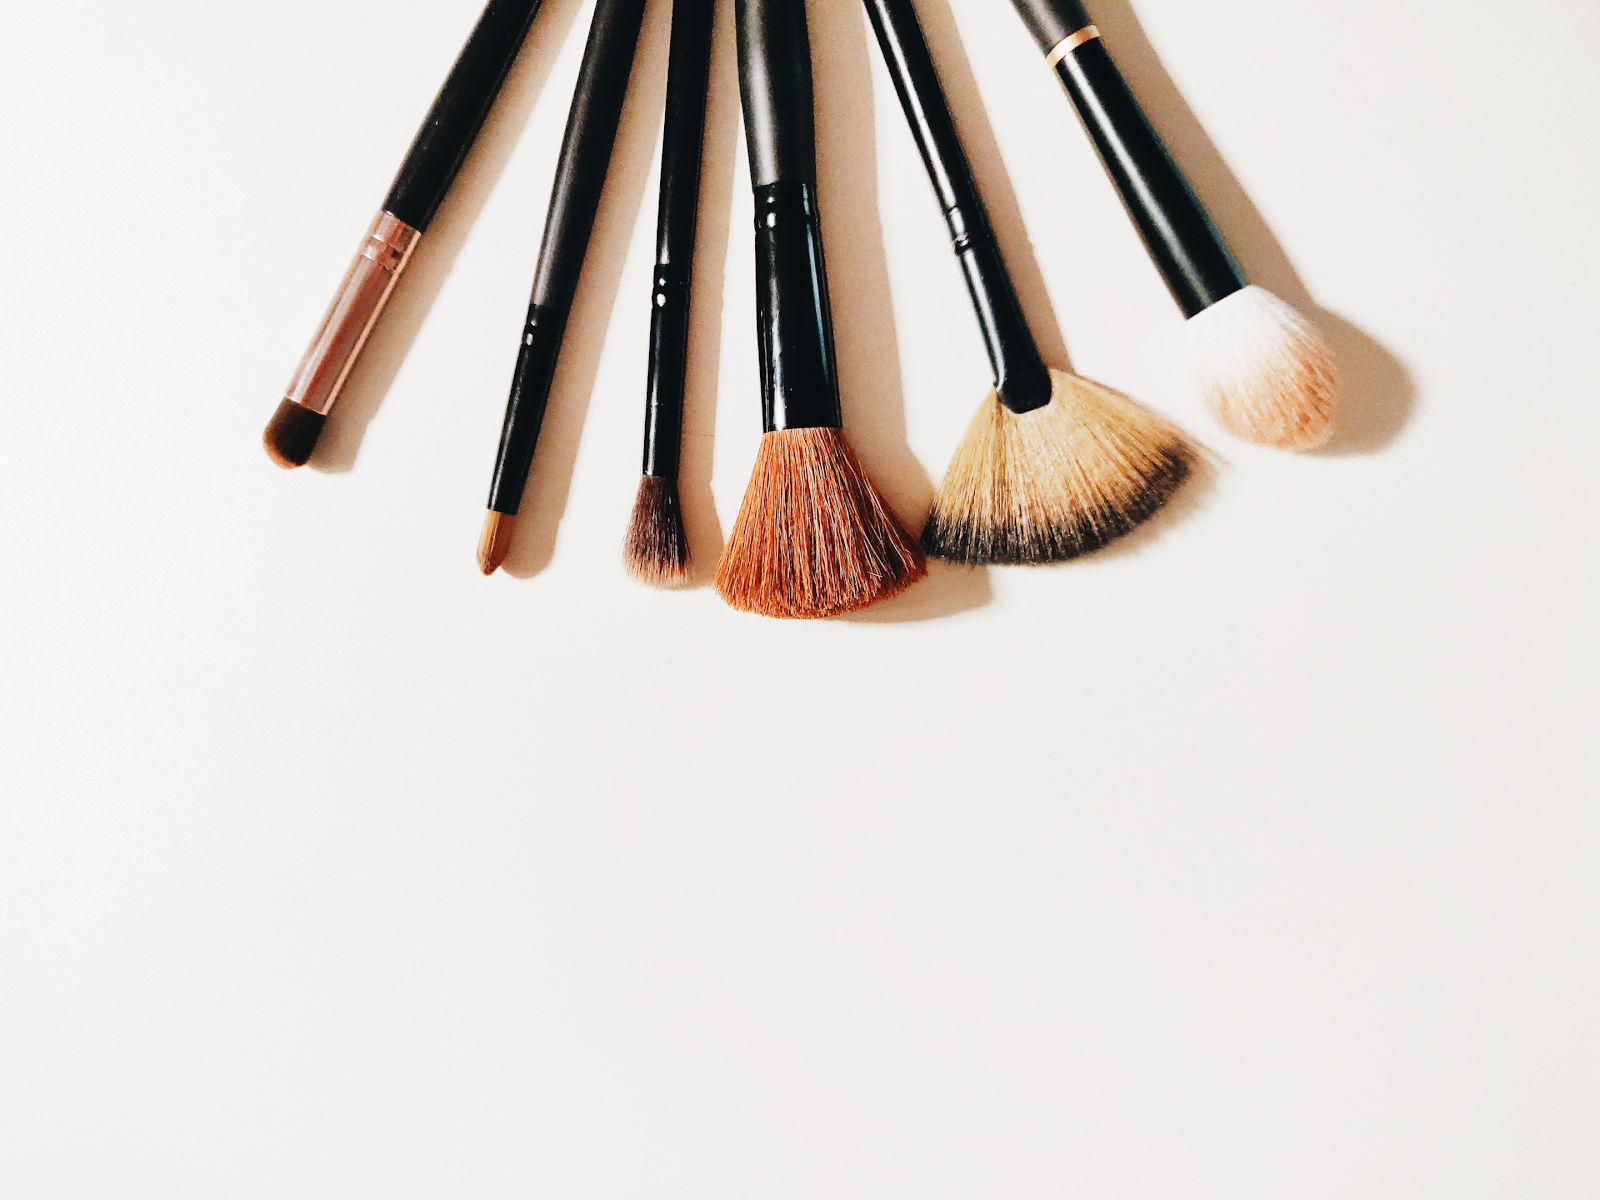 Add a set of brushes to your teen makeup kit 